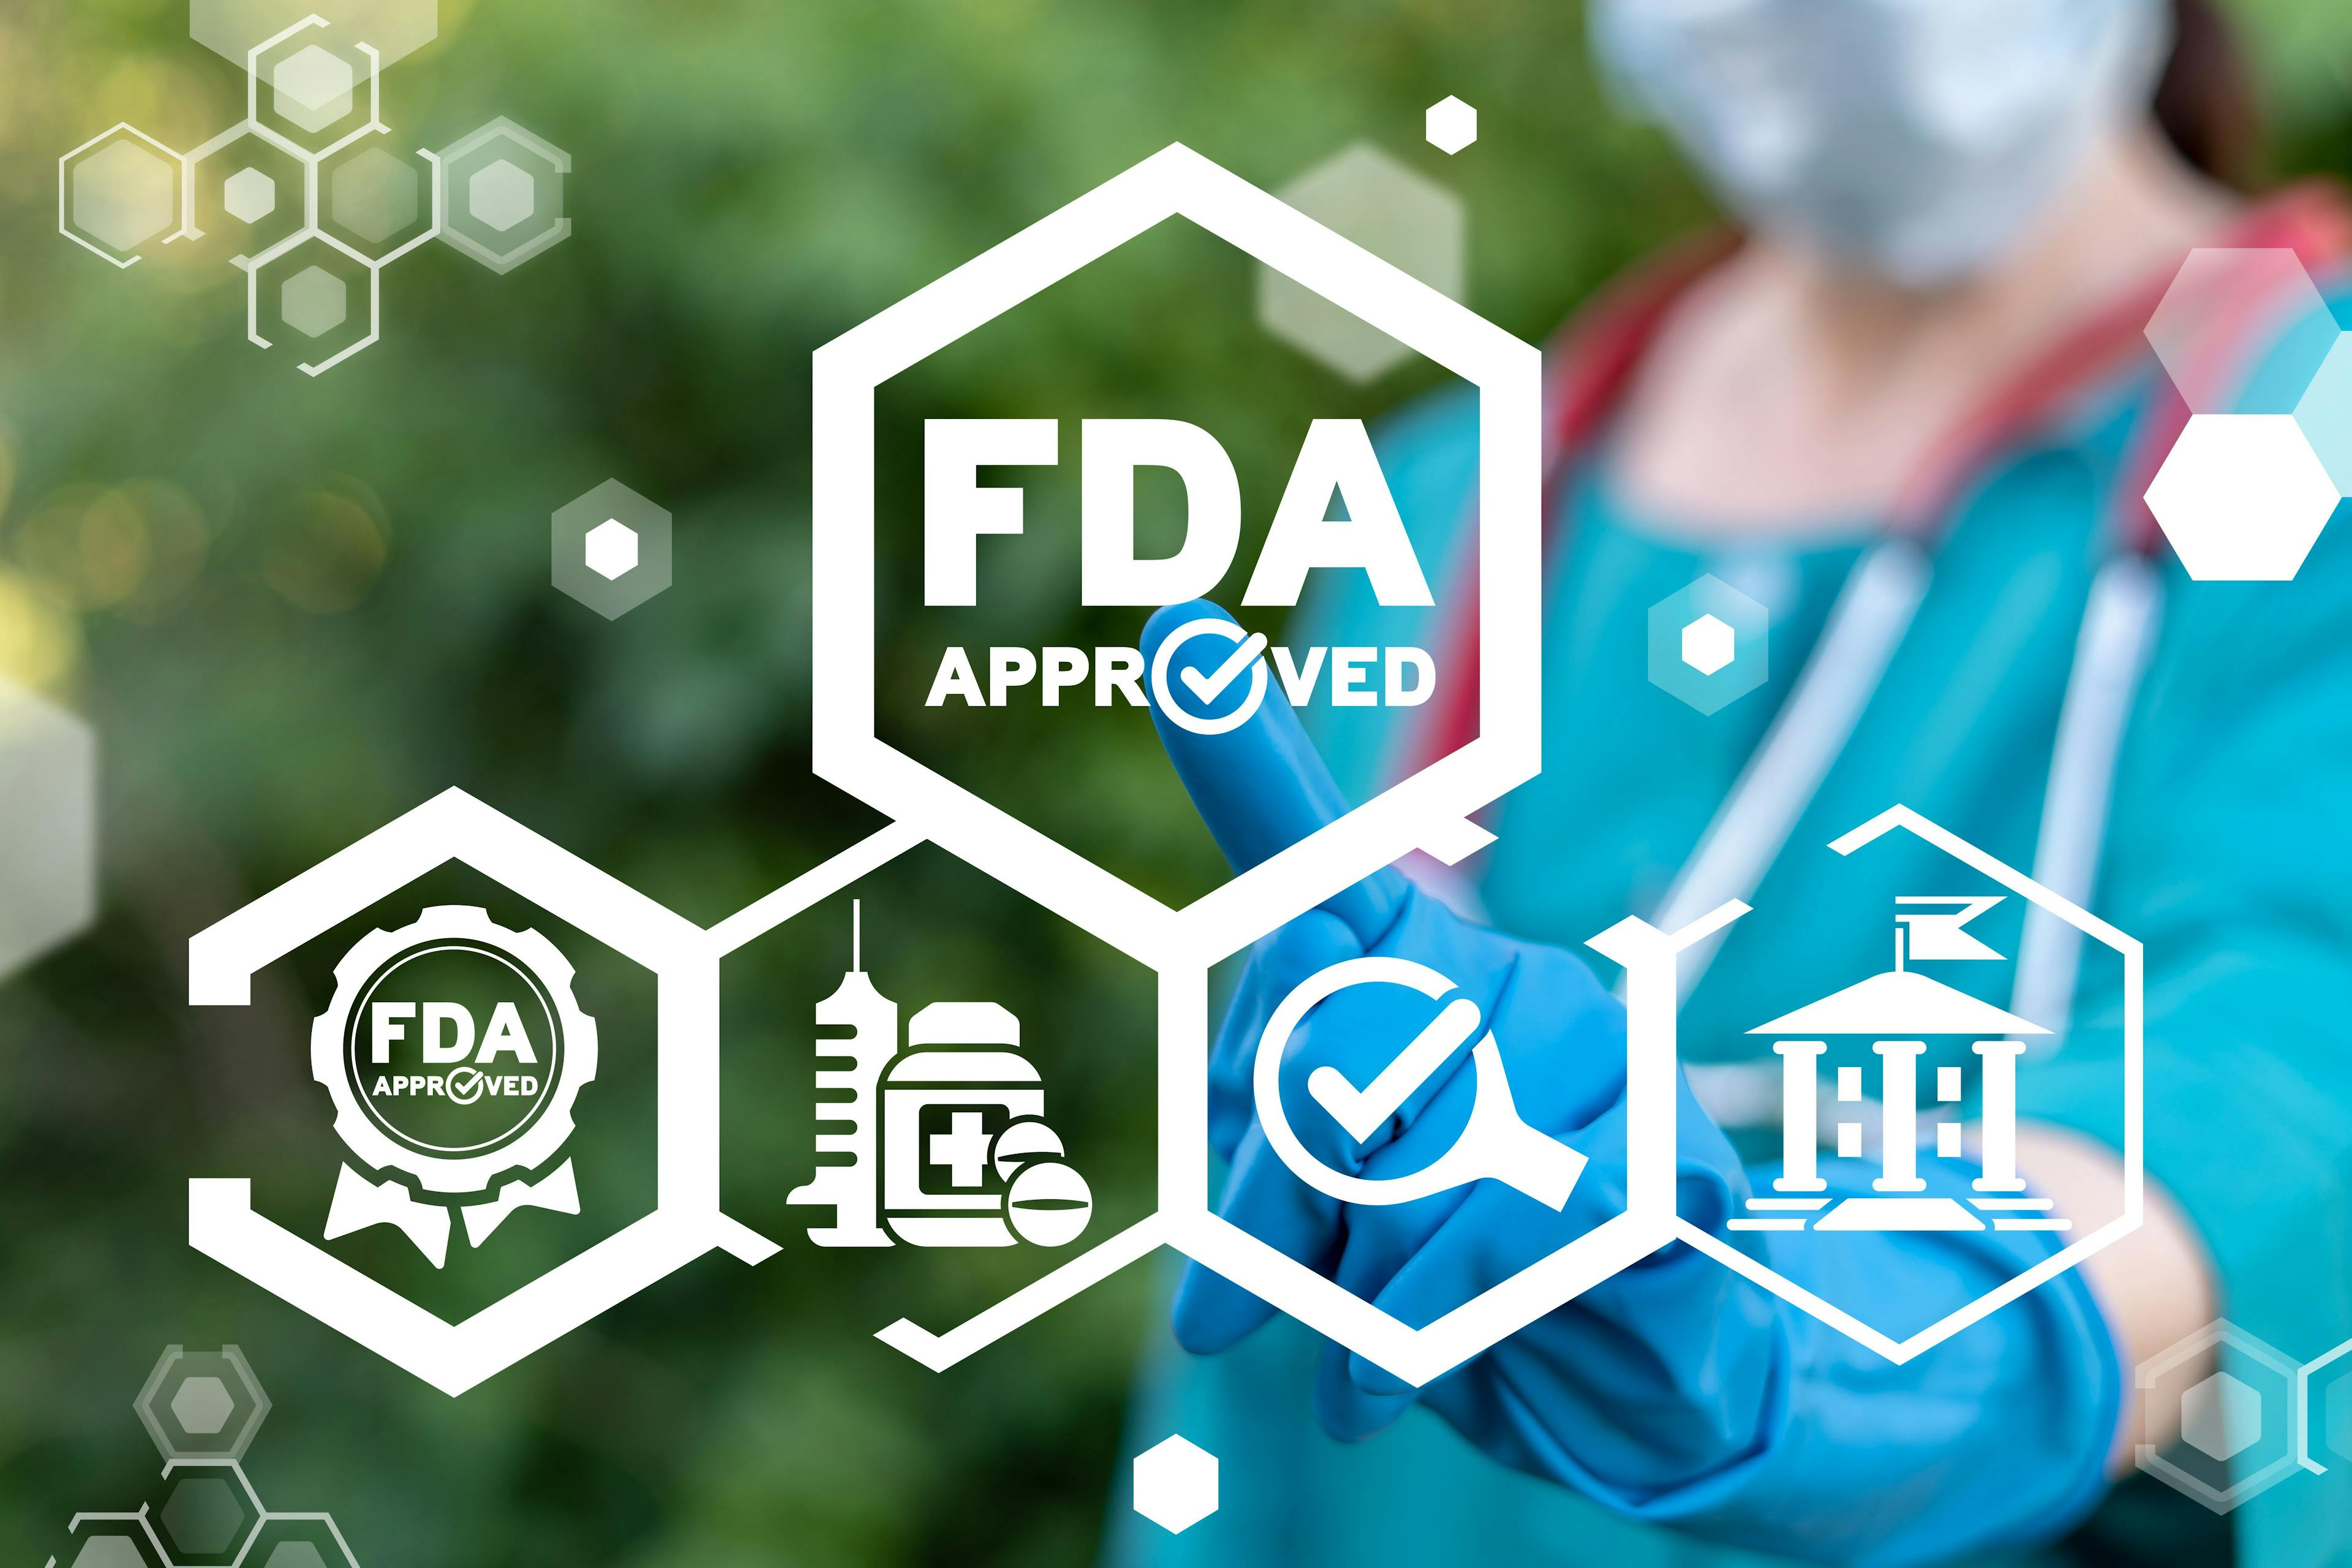 Medical concept of FDA approved. Food and drugs administration quality control. | Image Credit: wladimir1804 - stock.adobe.com